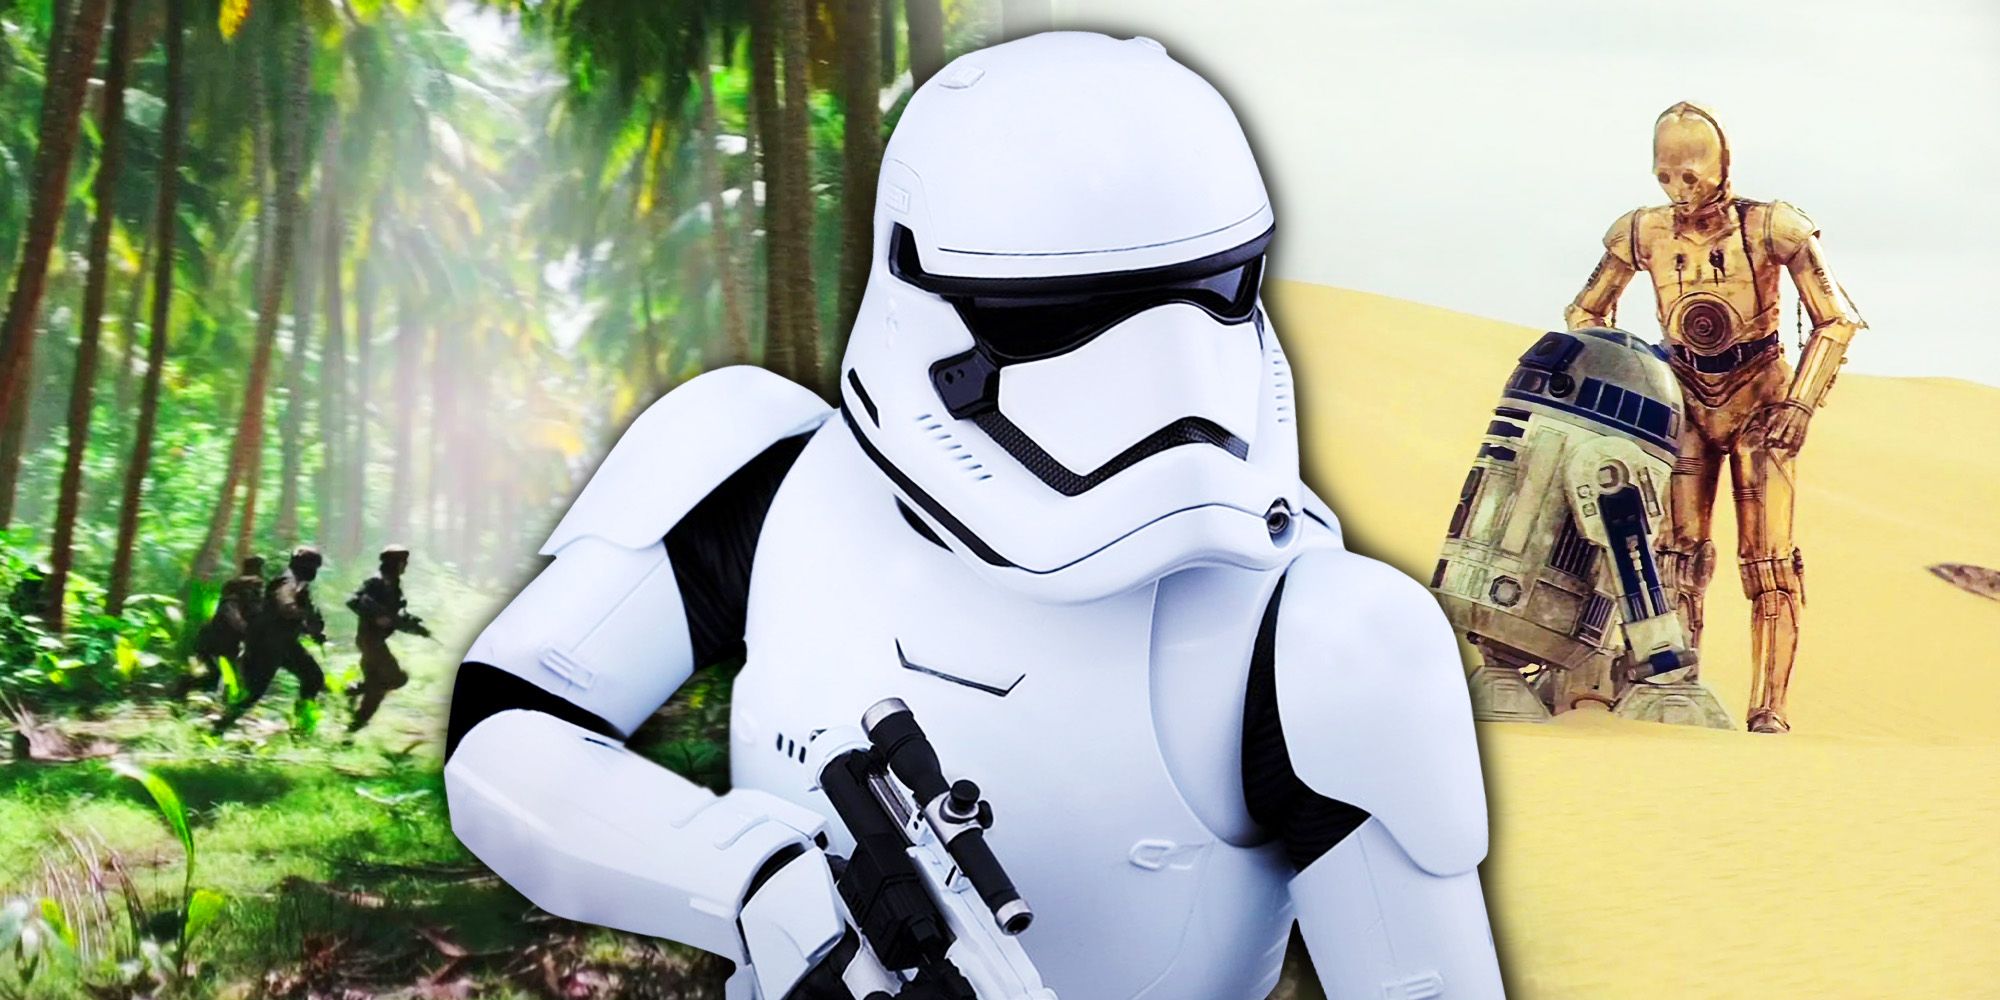 Stormtrooper on an image of Tatooine from A New Hope and an image of Scarif from Rogue One